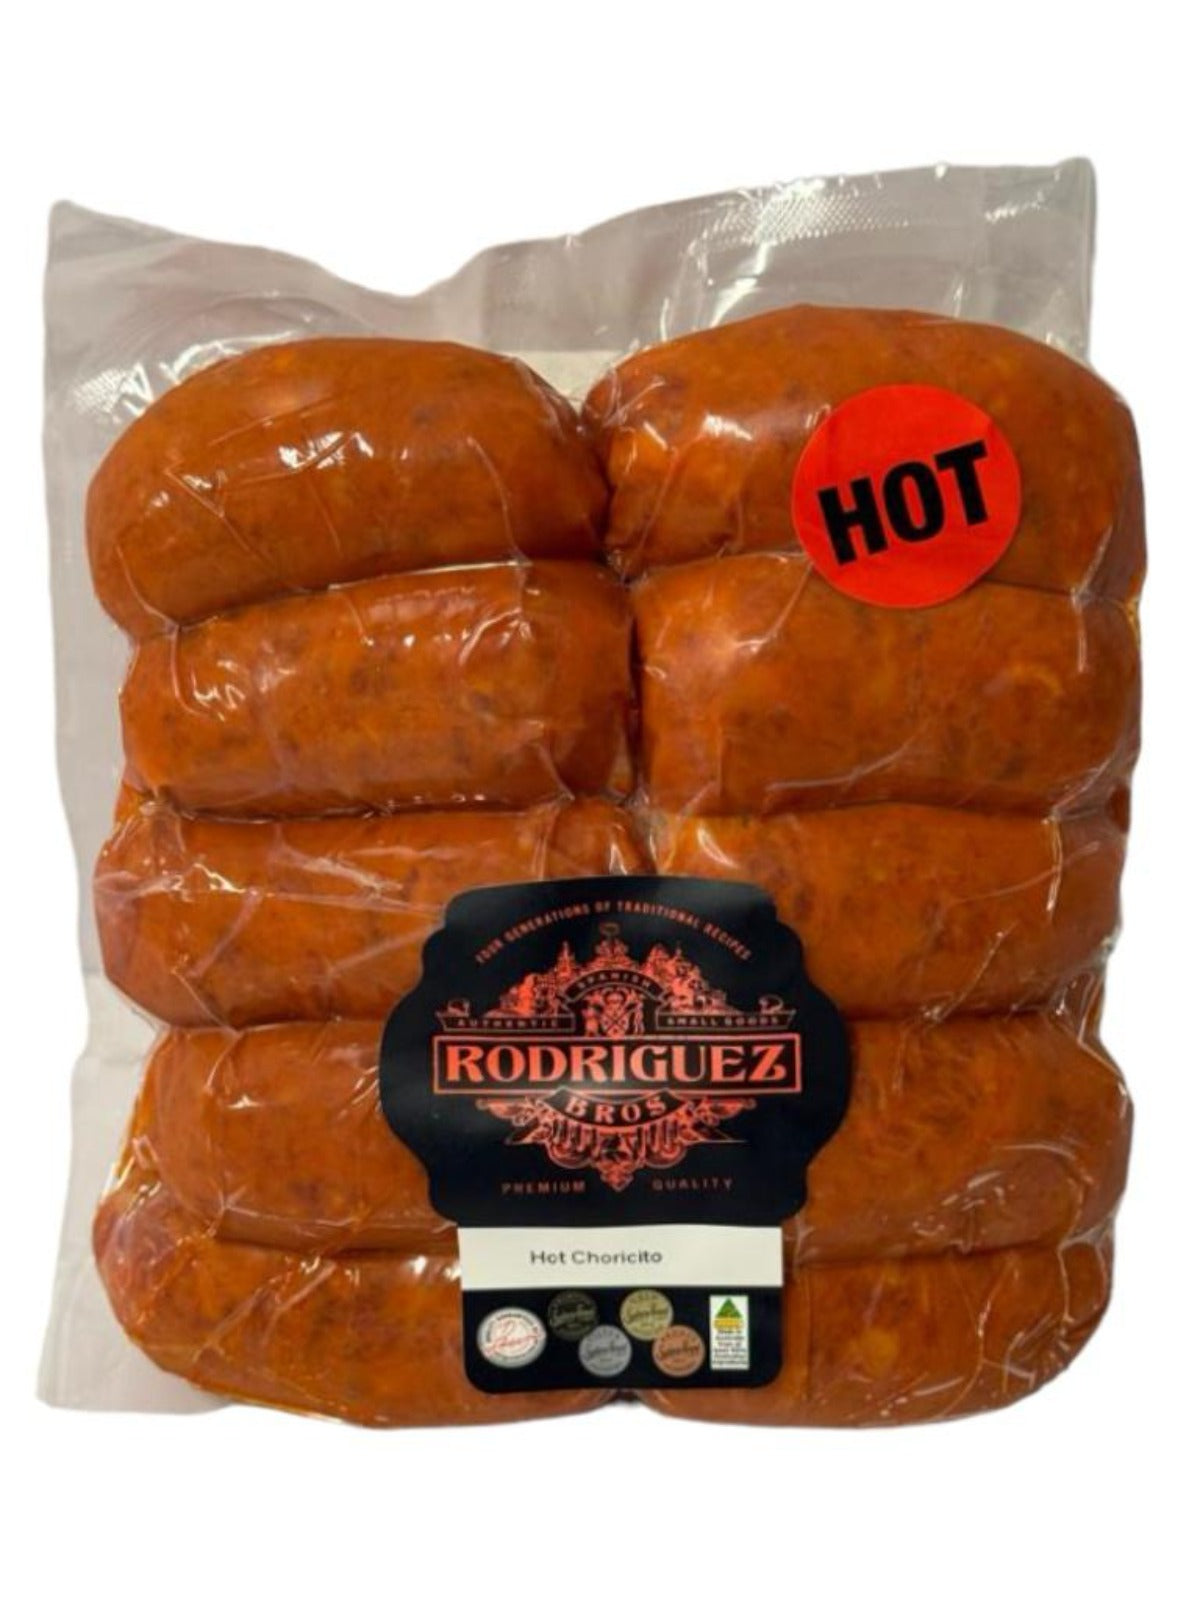 HOT Fresh Spanish Chorizito Choricito Mini Chorizo 18 piece pack approx. 900g packet. Regular price $17.00. [You are guaranteed to receive at least 855g of product, equivalent price of $20.00 per kg.]